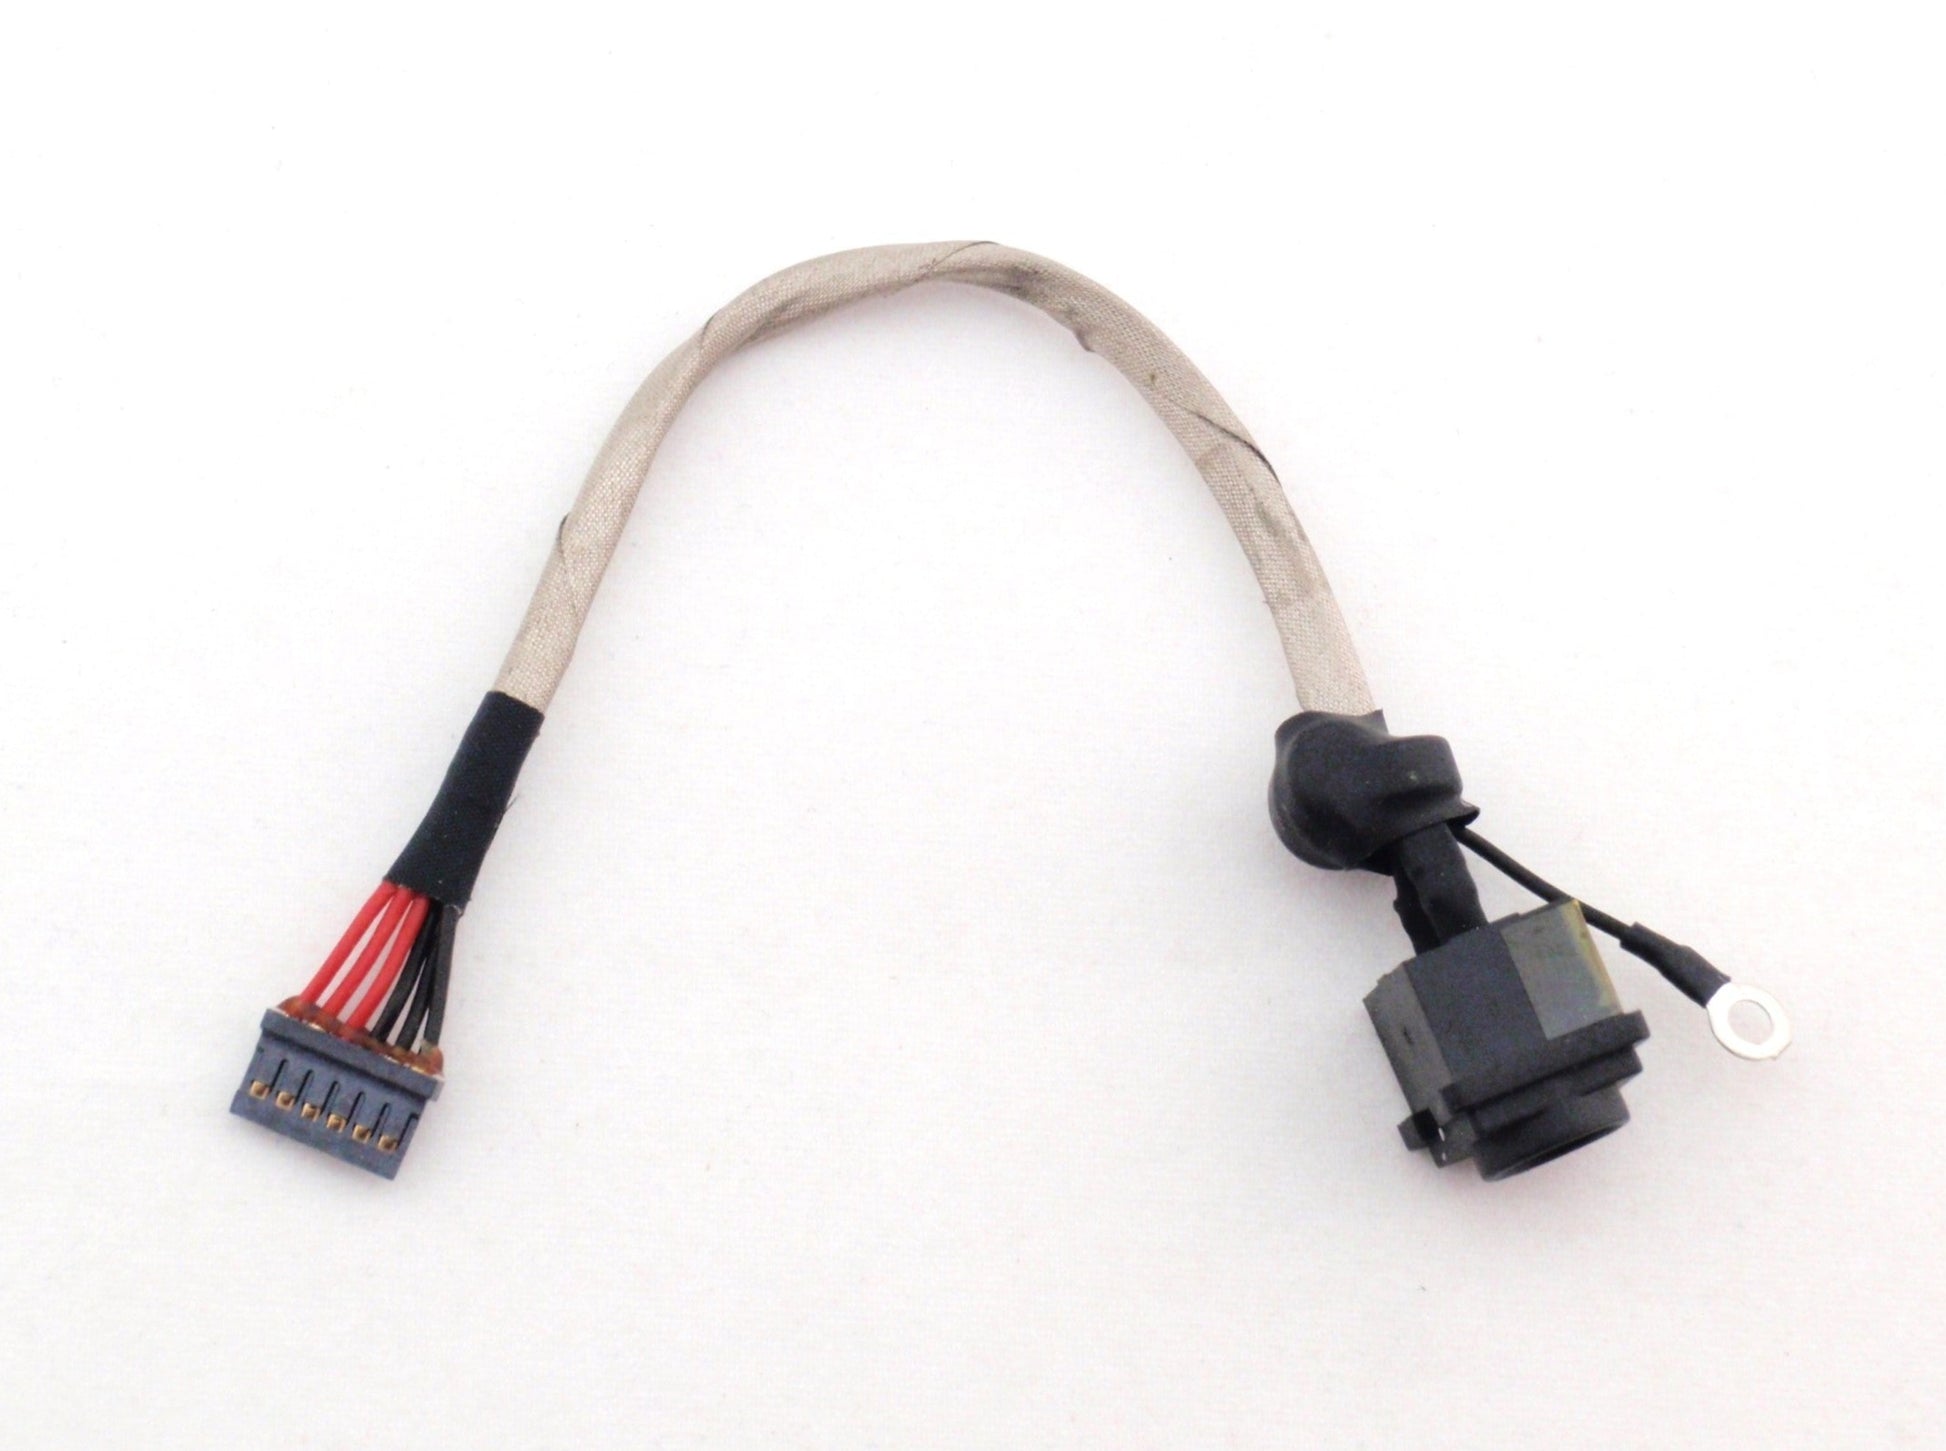 Sony New DC In Power Jack Charging Port Connector Socket Cable Vaio VPC-F21 VPC-F22 VPC-F23 VPC-F24 603-0001-6843_A